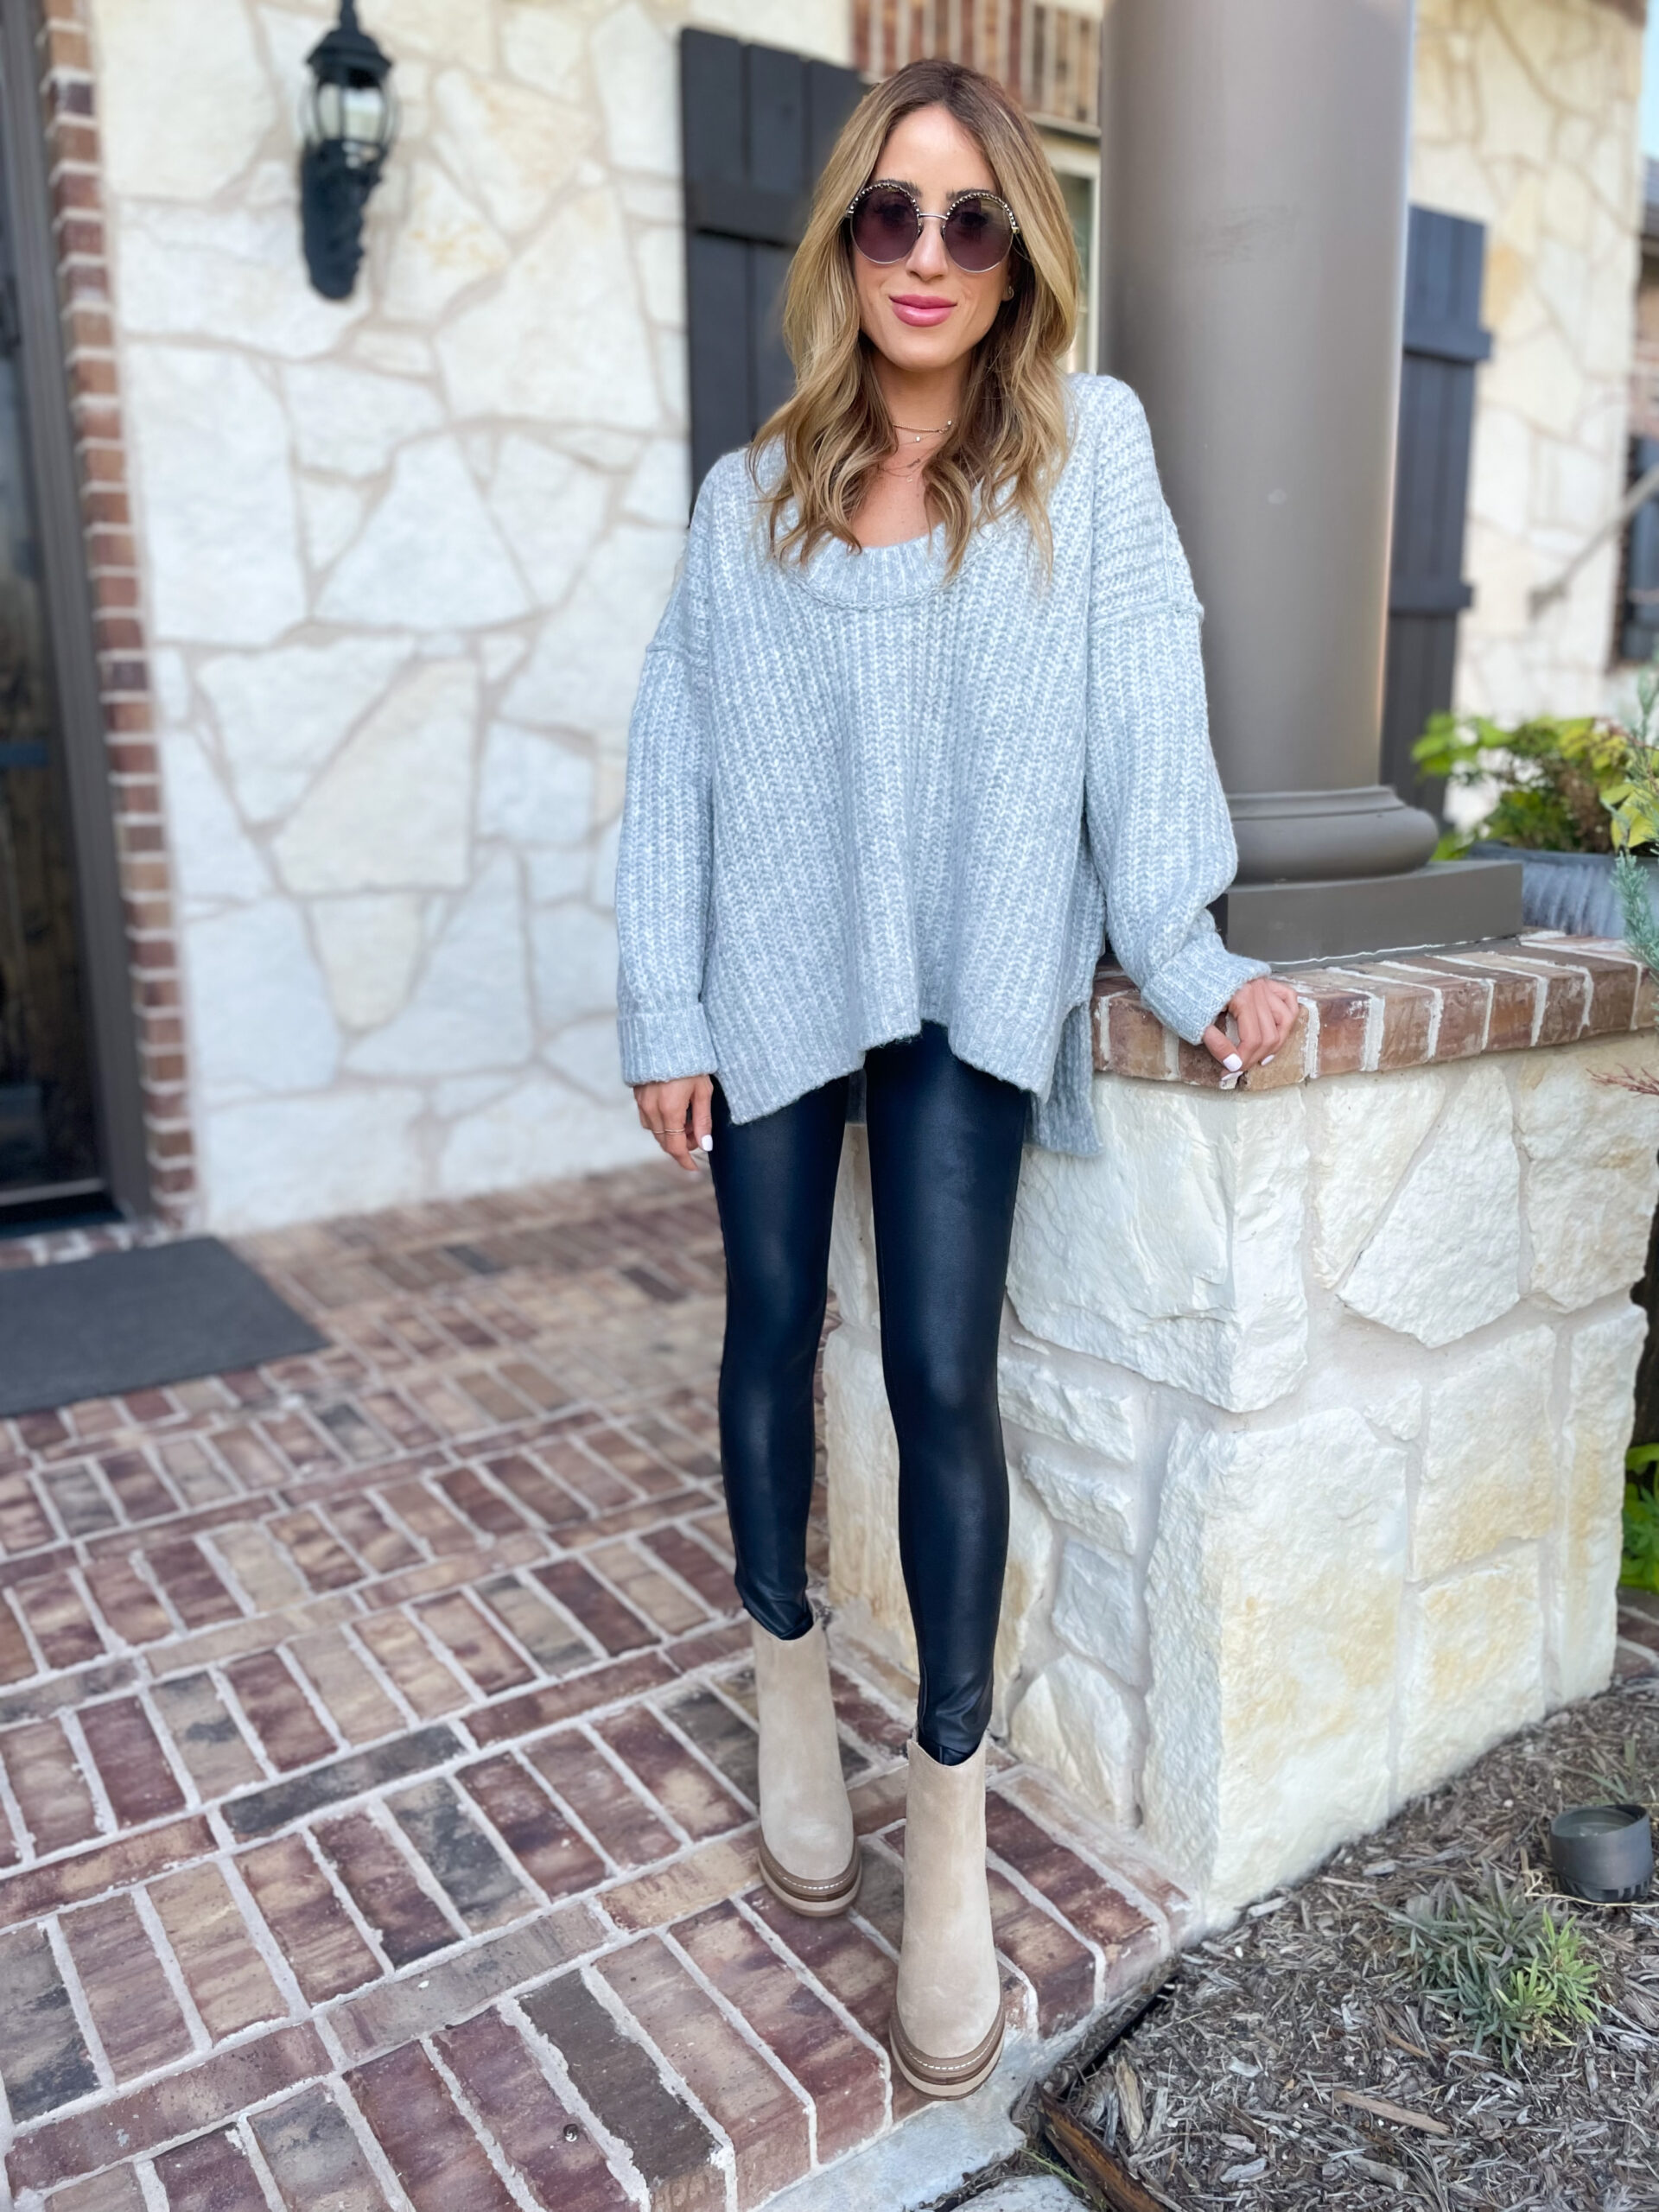 lifestyle and fashion bloggers alexis belbel sharing her october shopbop favorites | adoubledose.com